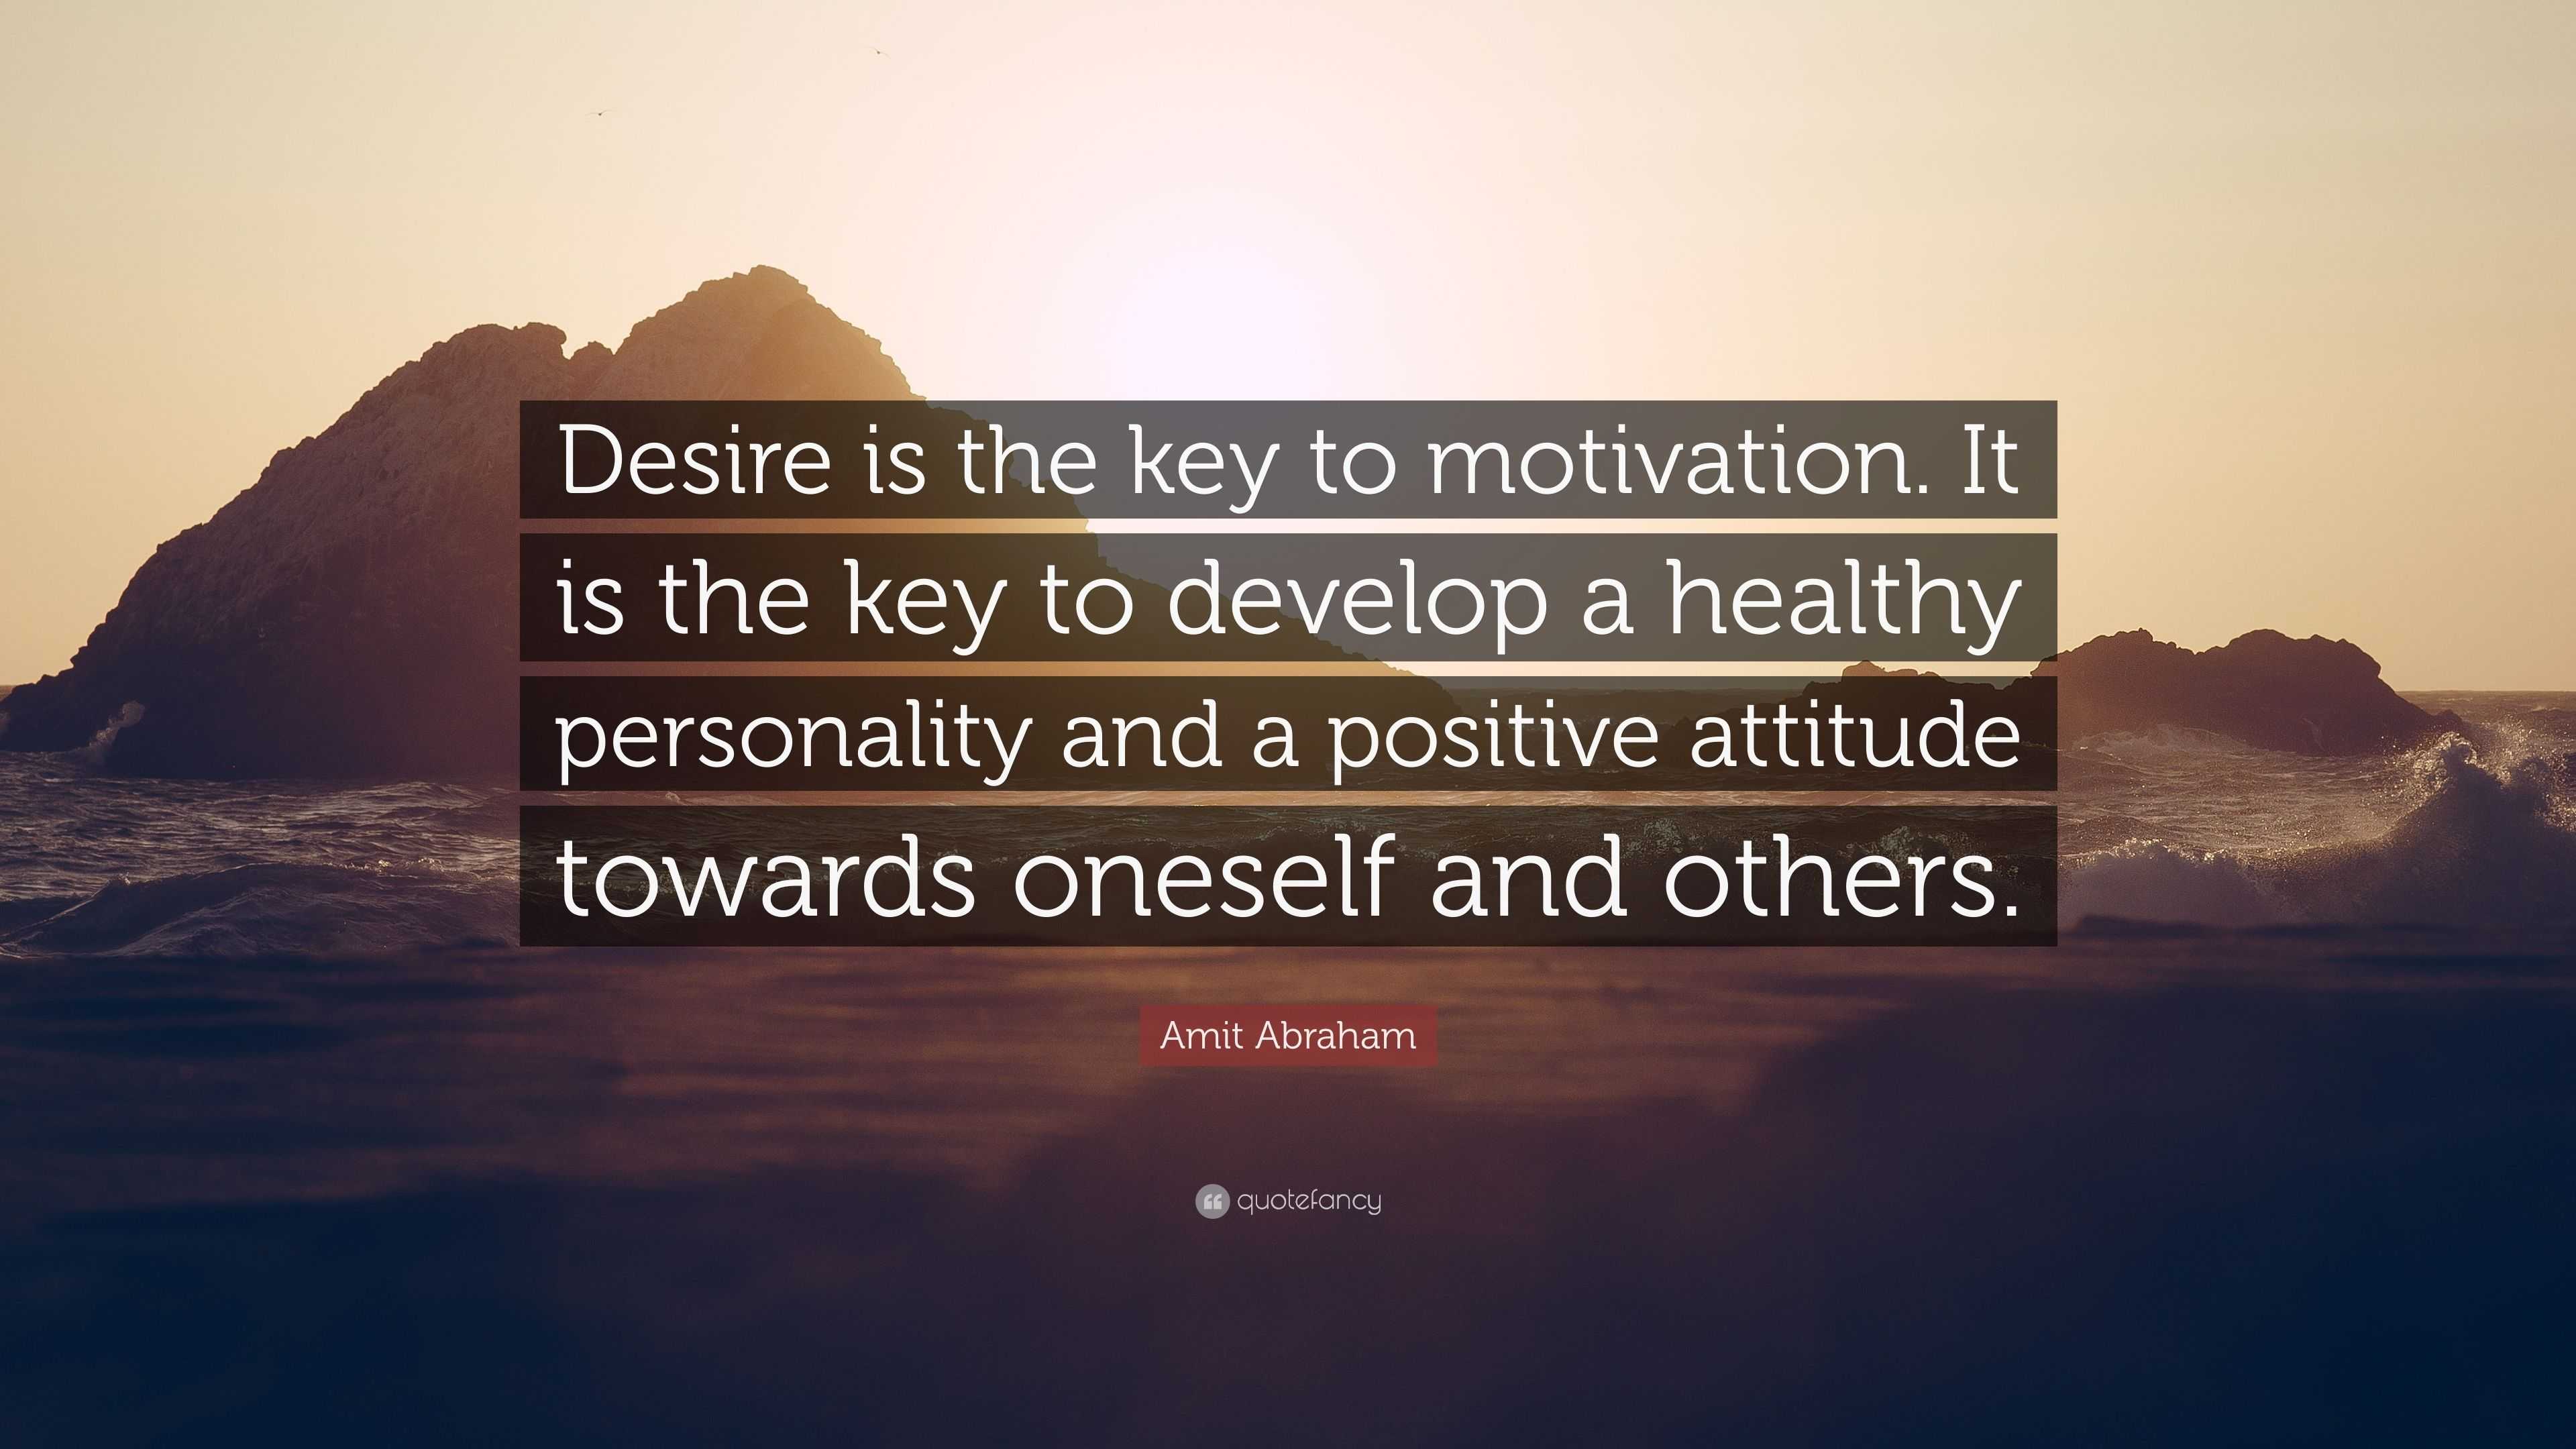 Amit Abraham Quote: “Desire is the key to motivation. It is the key to ...